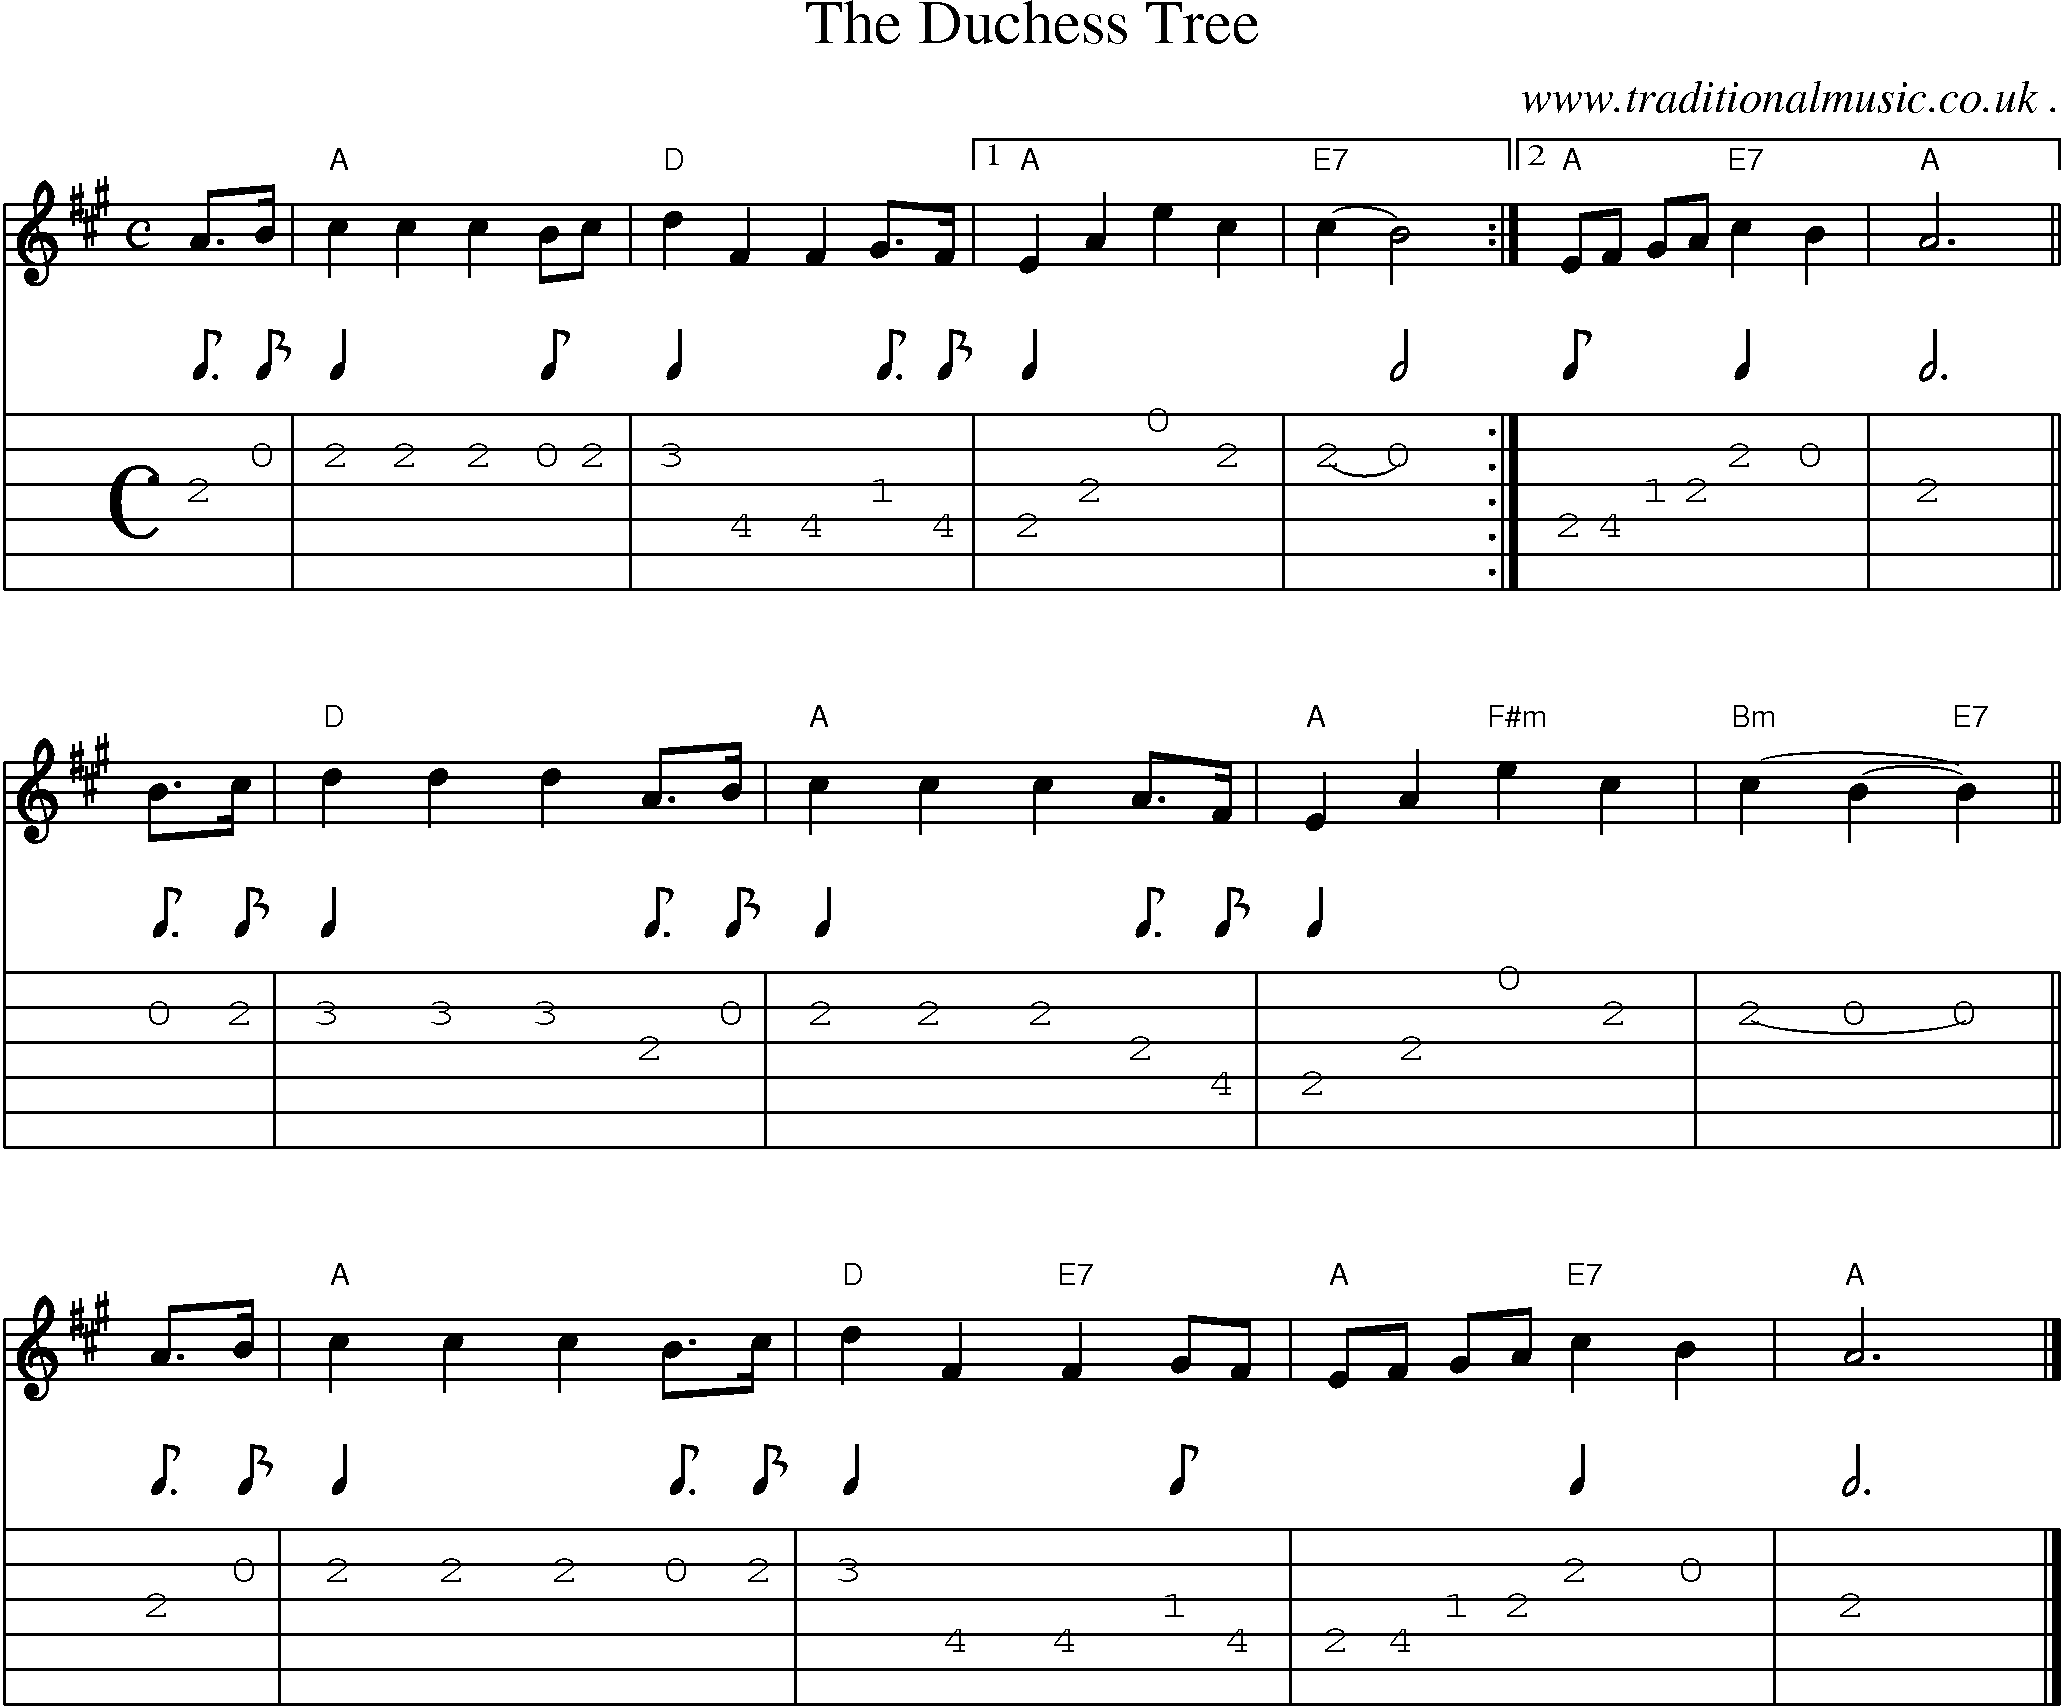 Sheet-music  score, Chords and Guitar Tabs for The Duchess Tree